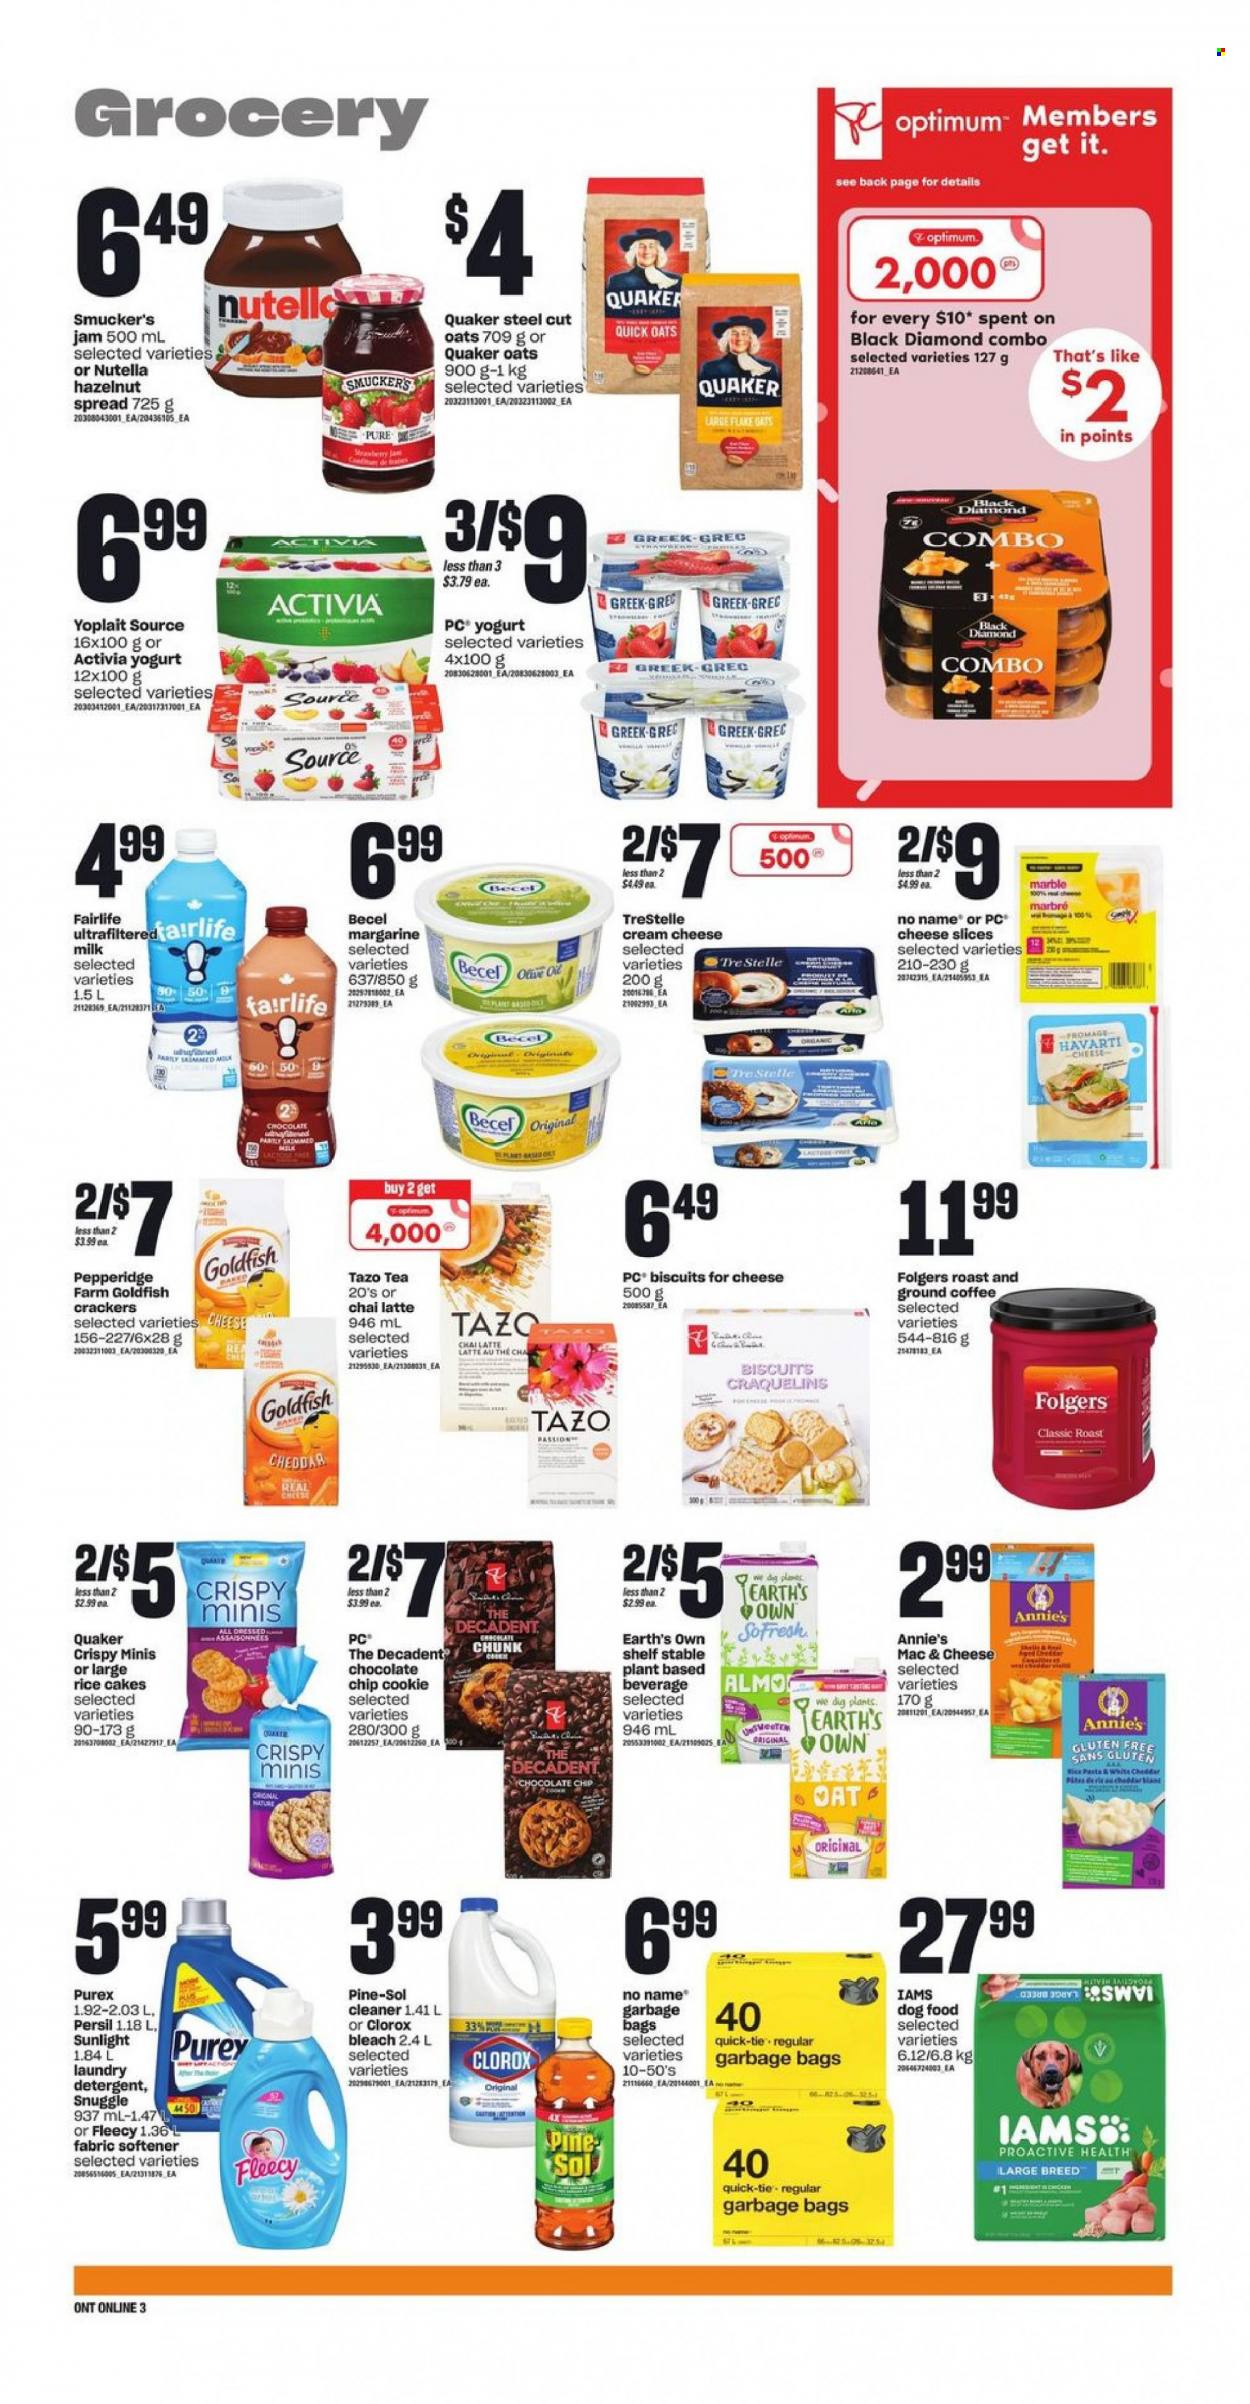 thumbnail - Independent Flyer - January 26, 2023 - February 01, 2023 - Sales products - No Name, pasta, Quaker, Annie's, cream cheese, sliced cheese, Havarti, yoghurt, Activia, Yoplait, milk, margarine, crackers, biscuit, Goldfish, oats, strawberry jam, olive oil, fruit jam, hazelnut spread, tea, coffee, Folgers, ground coffee, cleaner, bleach, Clorox, Pine-Sol, Snuggle, Persil, fabric softener, laundry detergent, Sunlight, Purex, bag, animal food, dog food, Optimum, Iams, detergent, Nutella. Page 11.